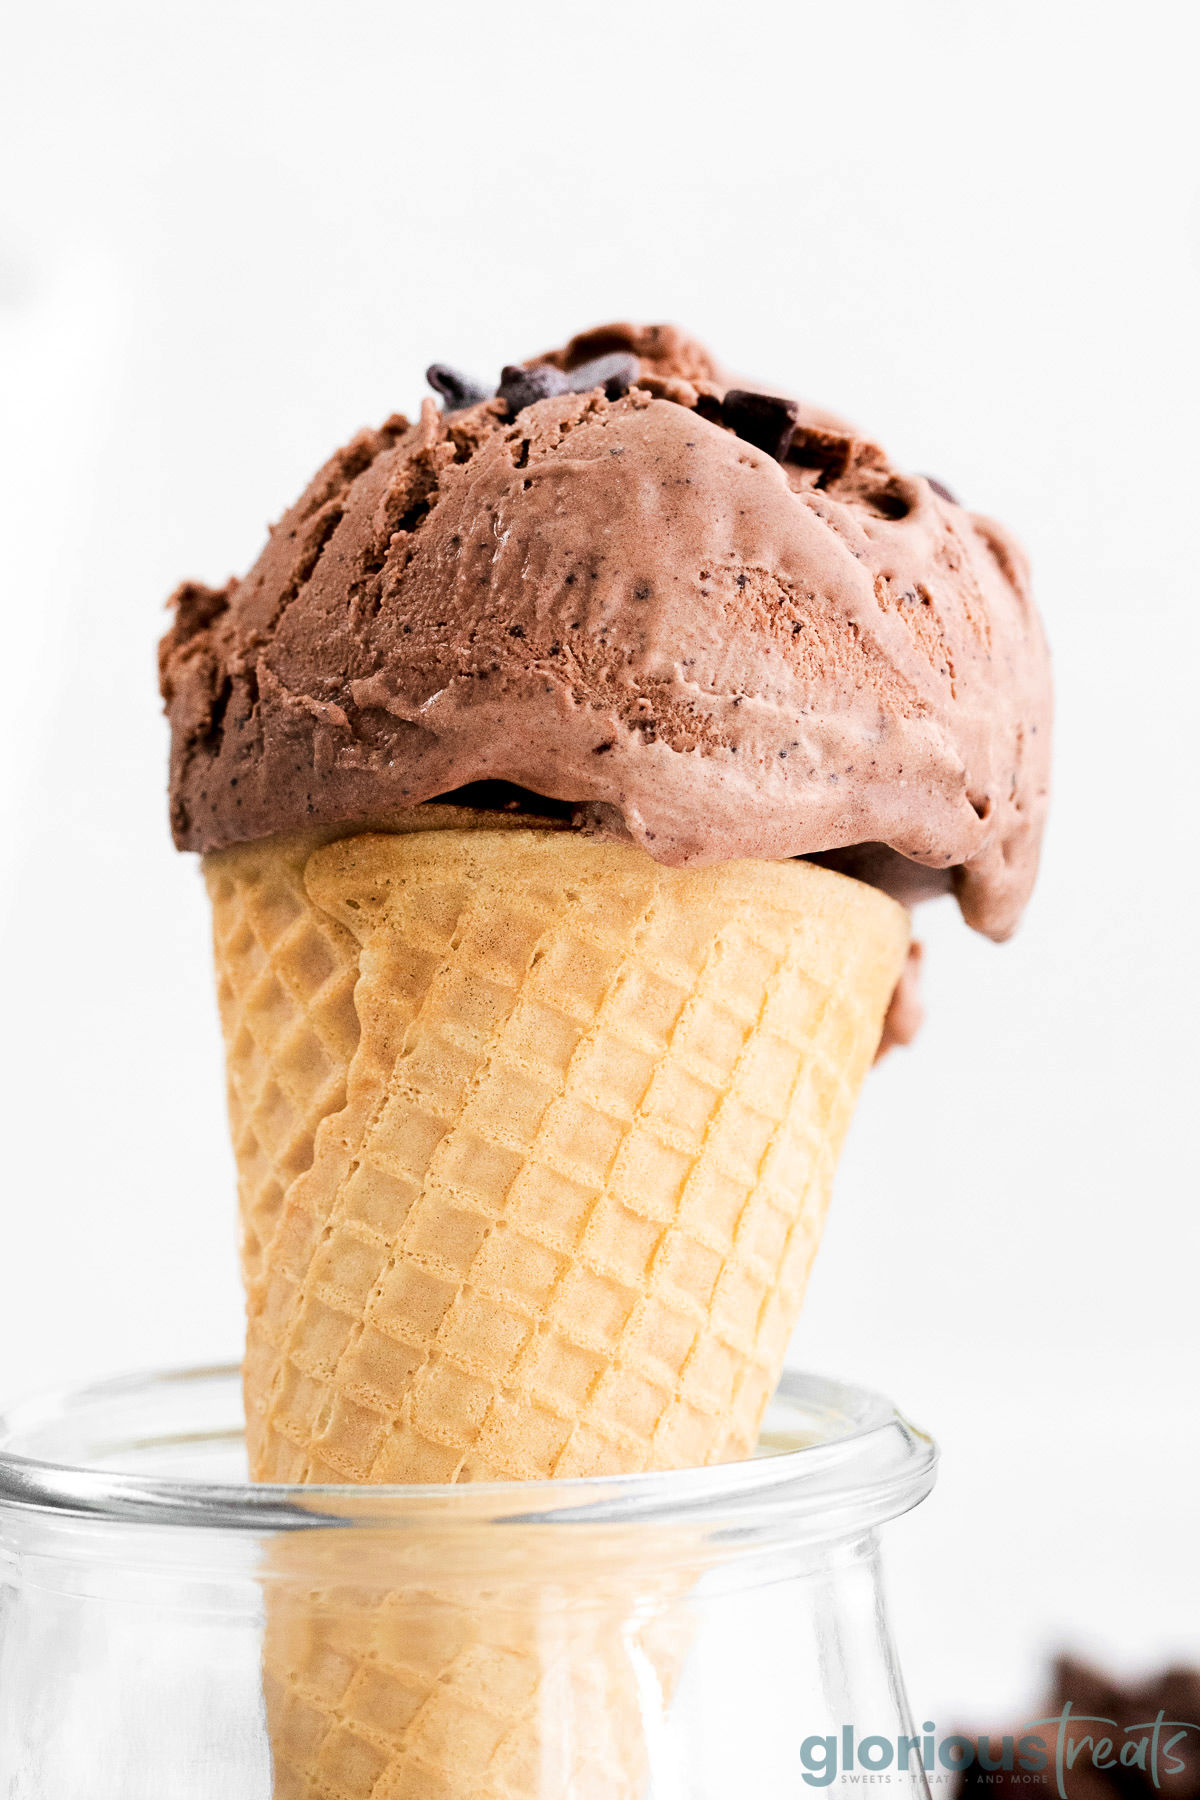 A side view of a scoop of chocolate ice cream on a cone in a glass jar.